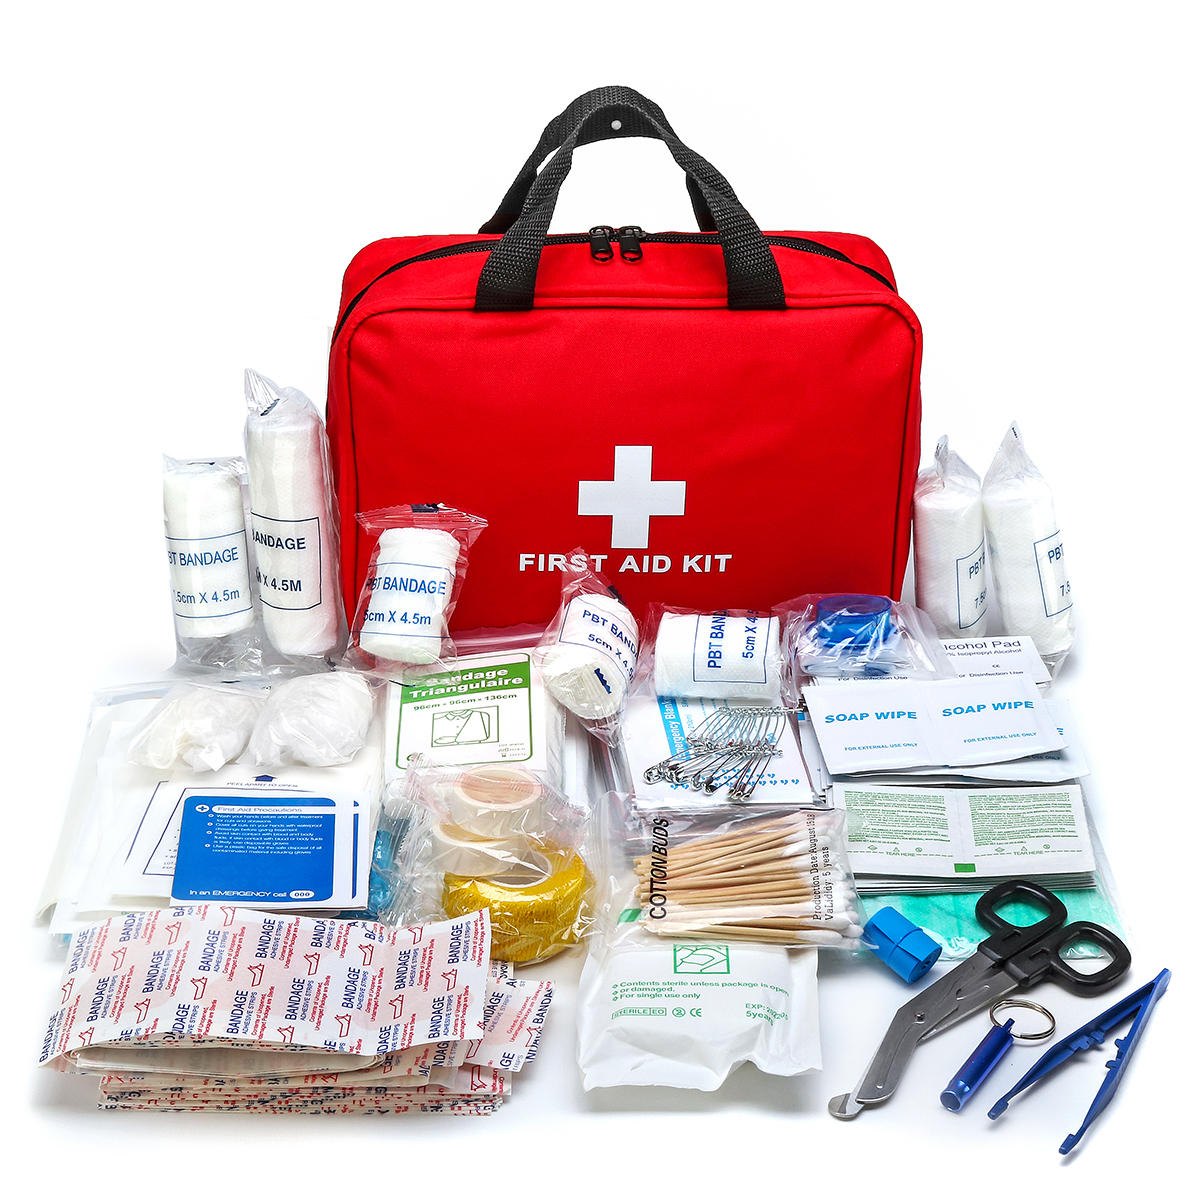 Where should you place the first aid kits at your workplace?